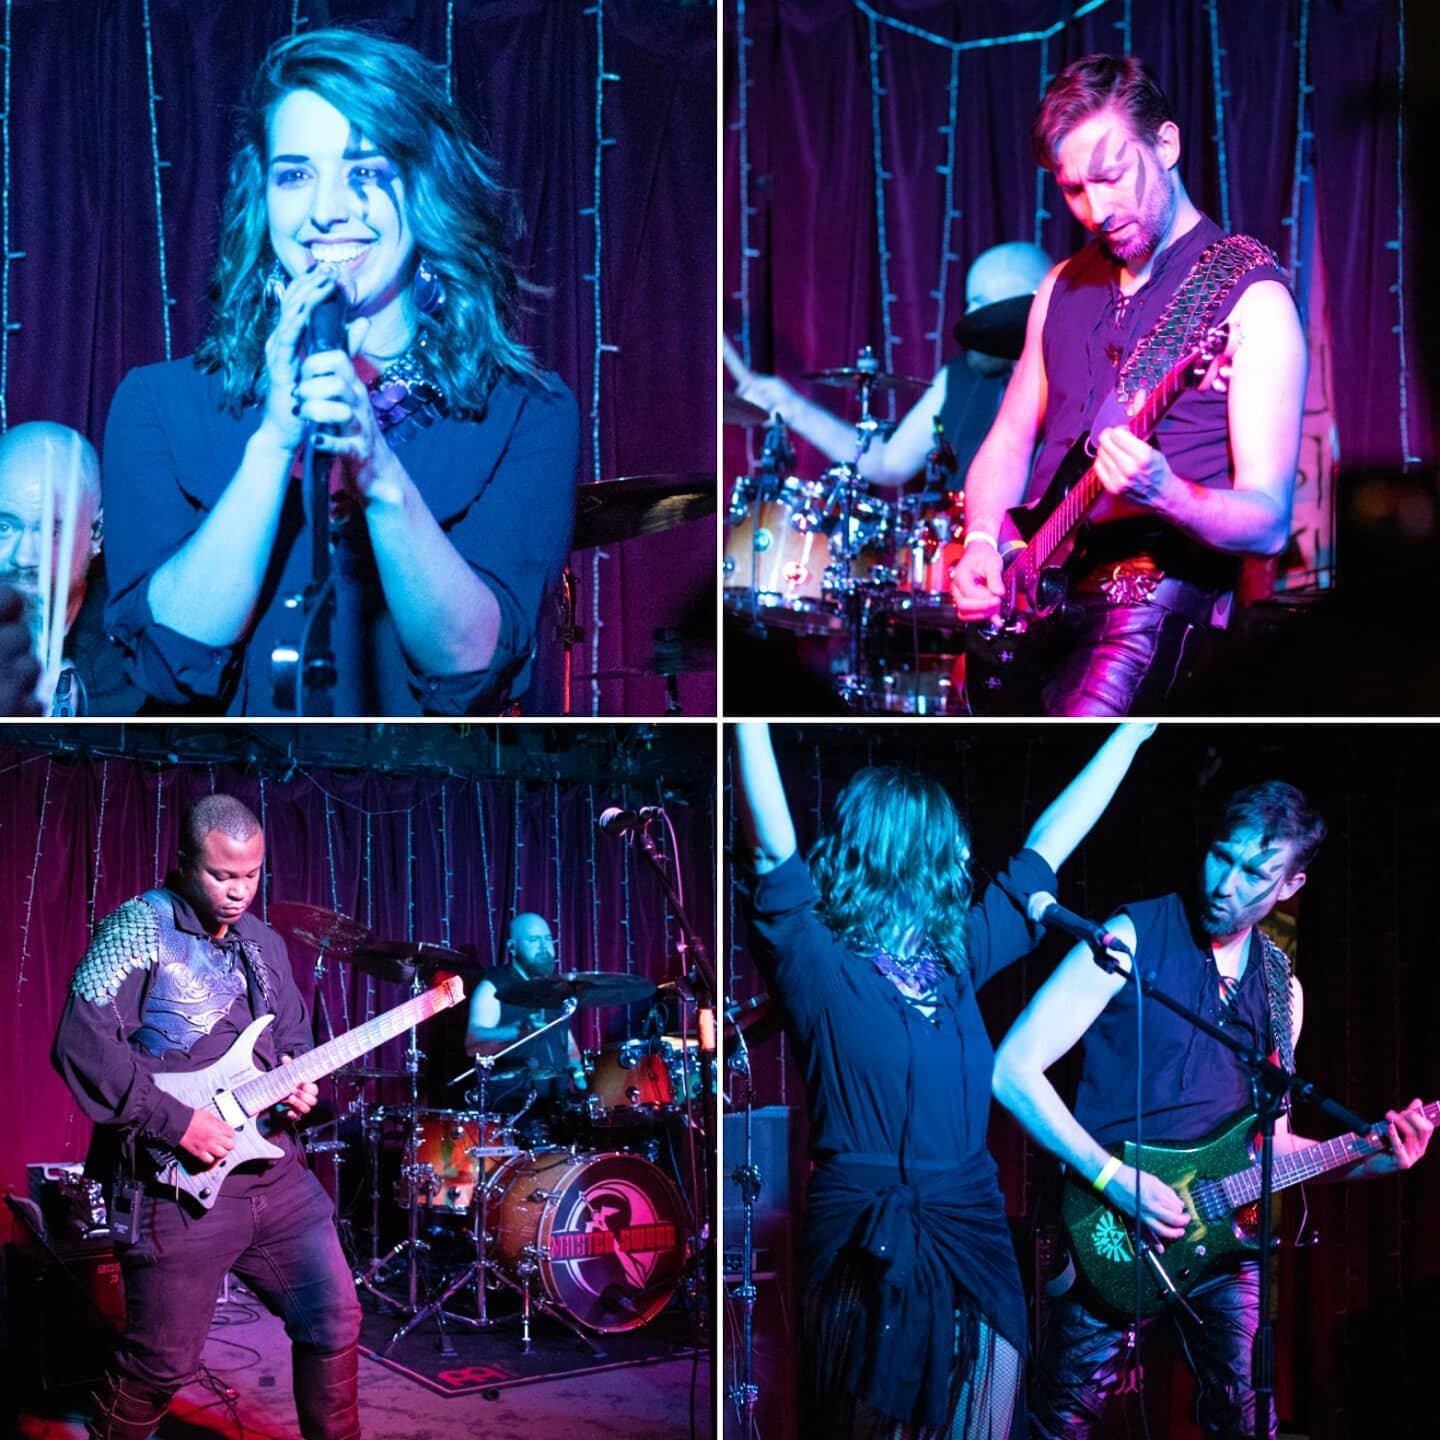 #tbt to our last set of live shows before the pandemic. It feels good to be practicing again and having new shows on the books! Look for us returning to the stage this fall!

Photos by @dankunc

#livemusic #liveband #livemetal #metal #powermetal #ner